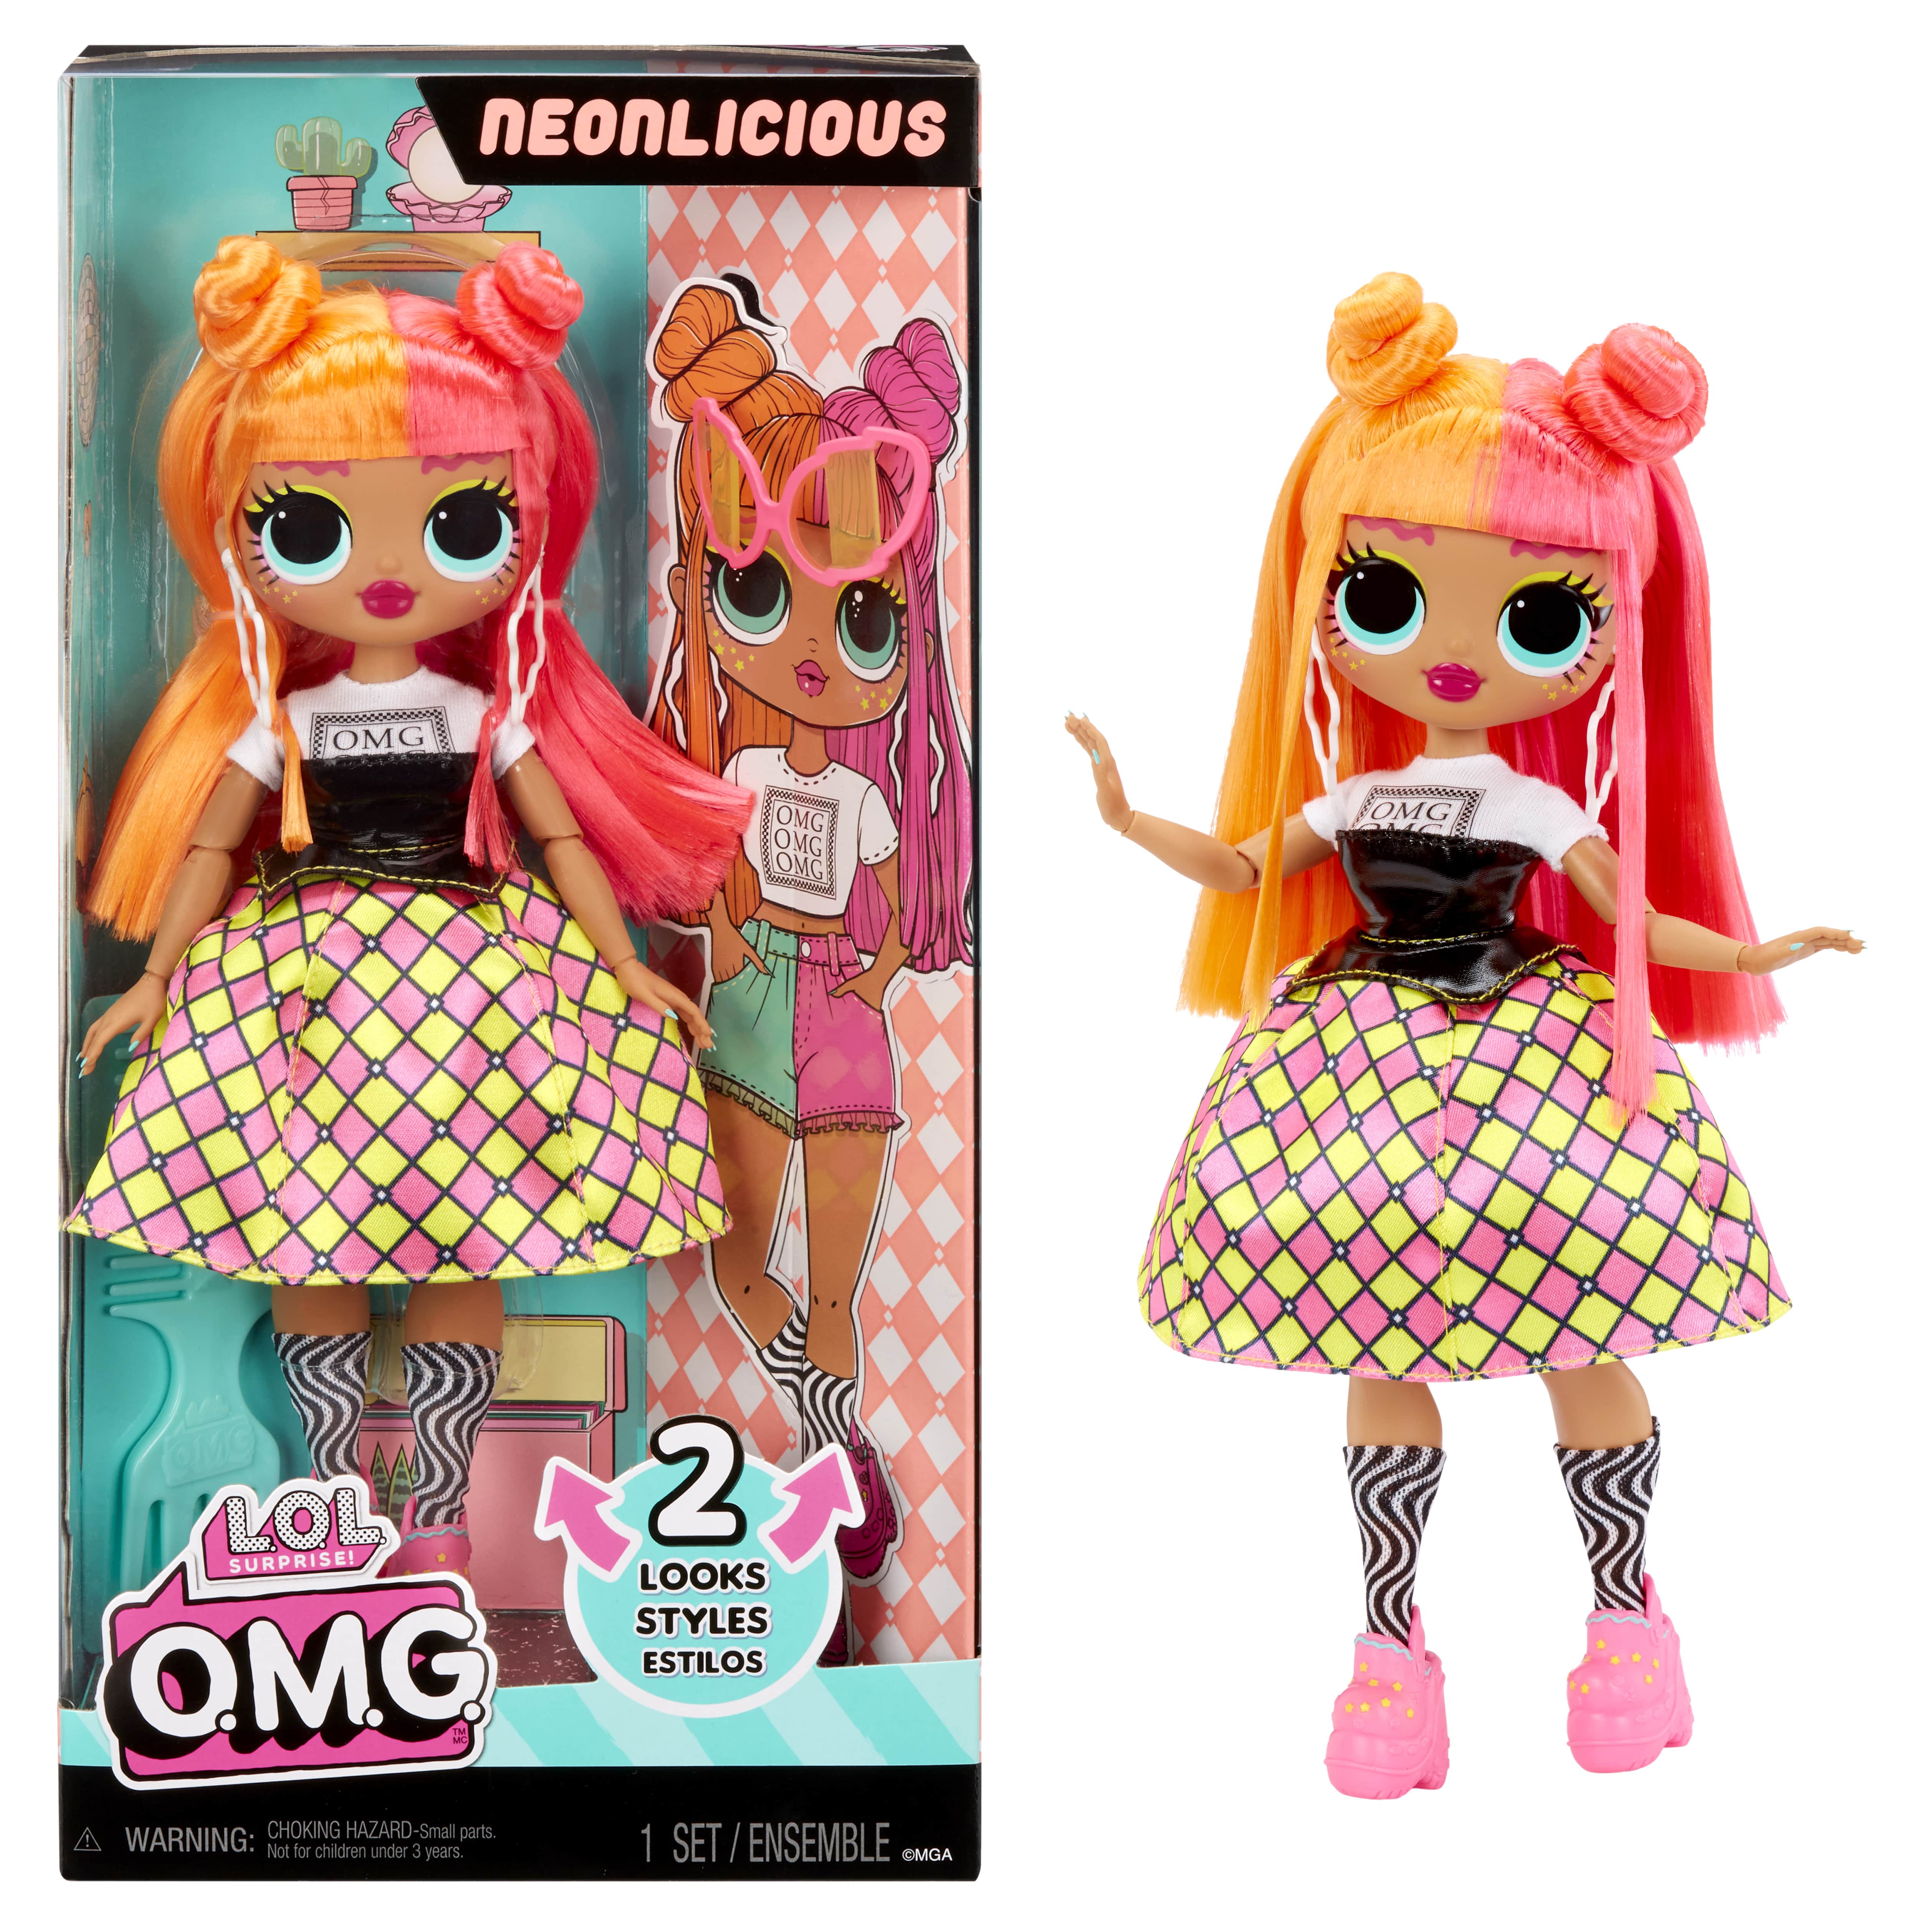 LOL Surprise OMG Neonlicious Fashion Doll with Multiple Surprises Including Transforming Fashions and Fabulous Accessories, Kids Gift Ages 4+ - image 1 of 8